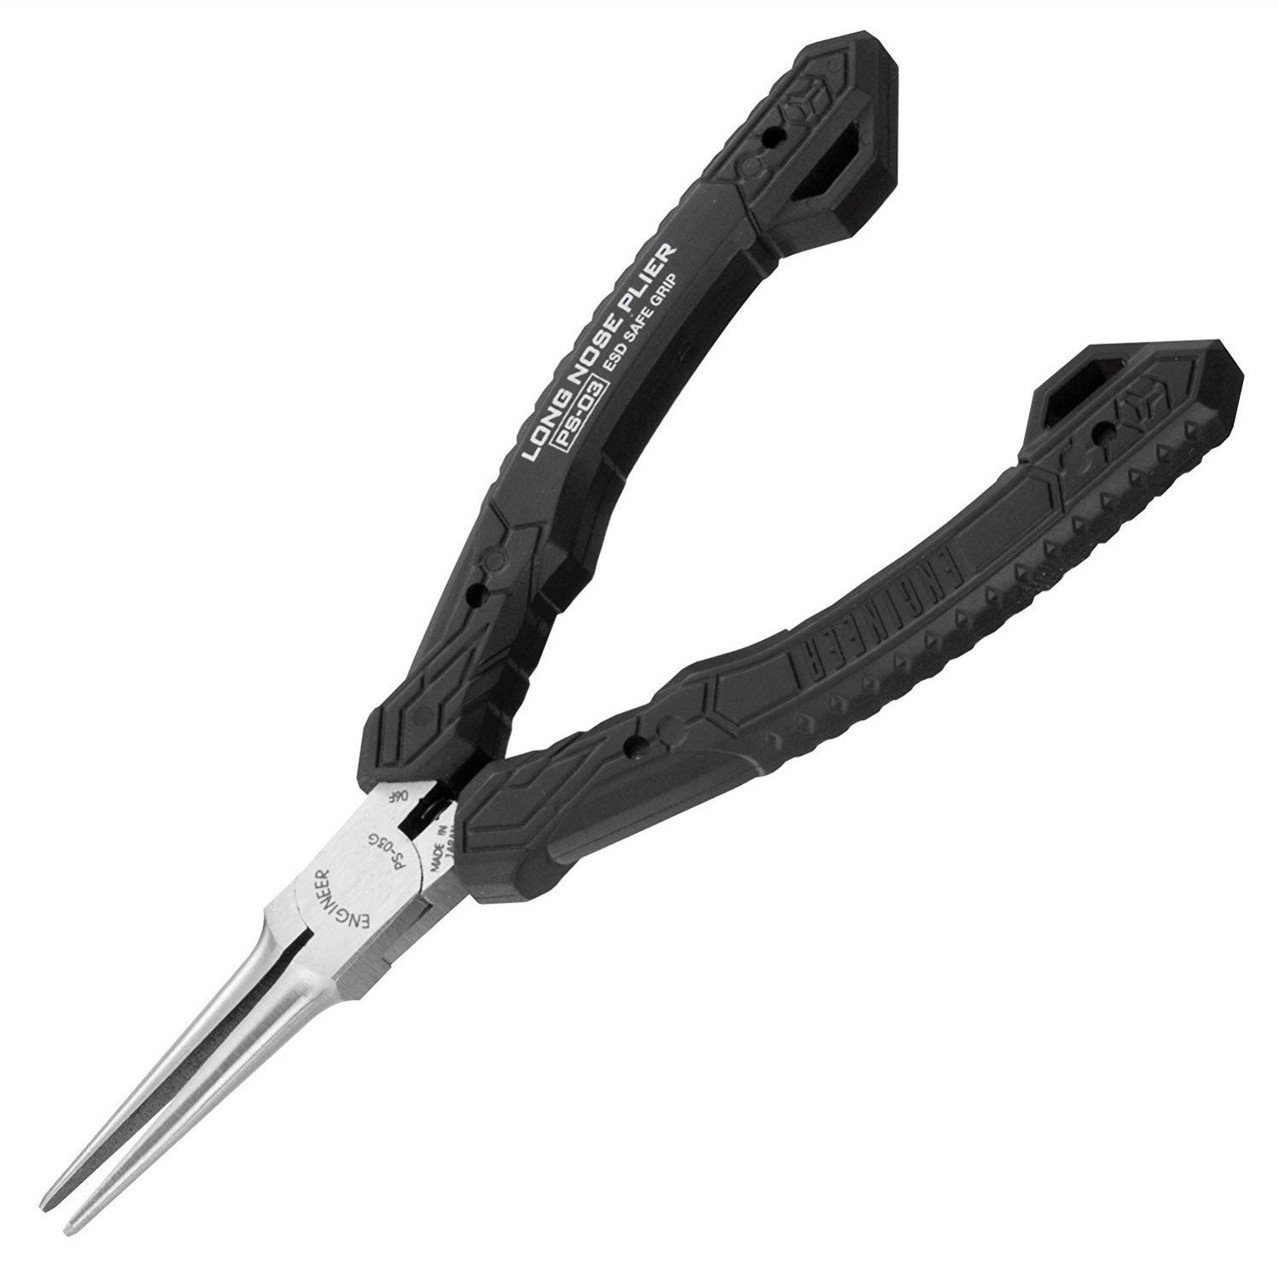 PS-03 needle nose pliers (compact, ESD safe) 